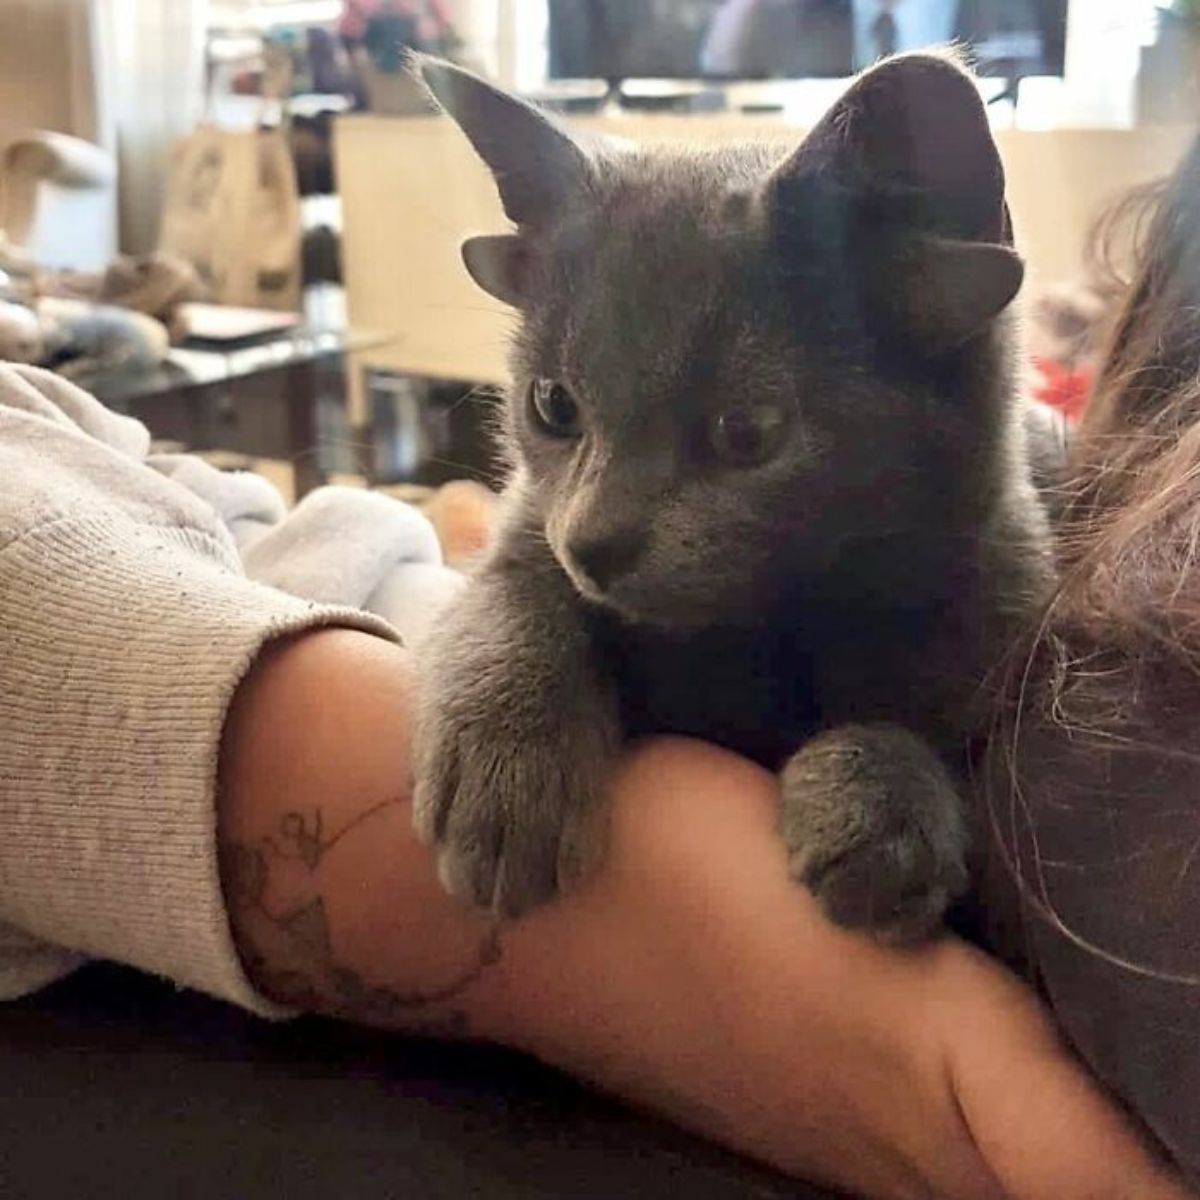 grey kitten with four ears being held by someone